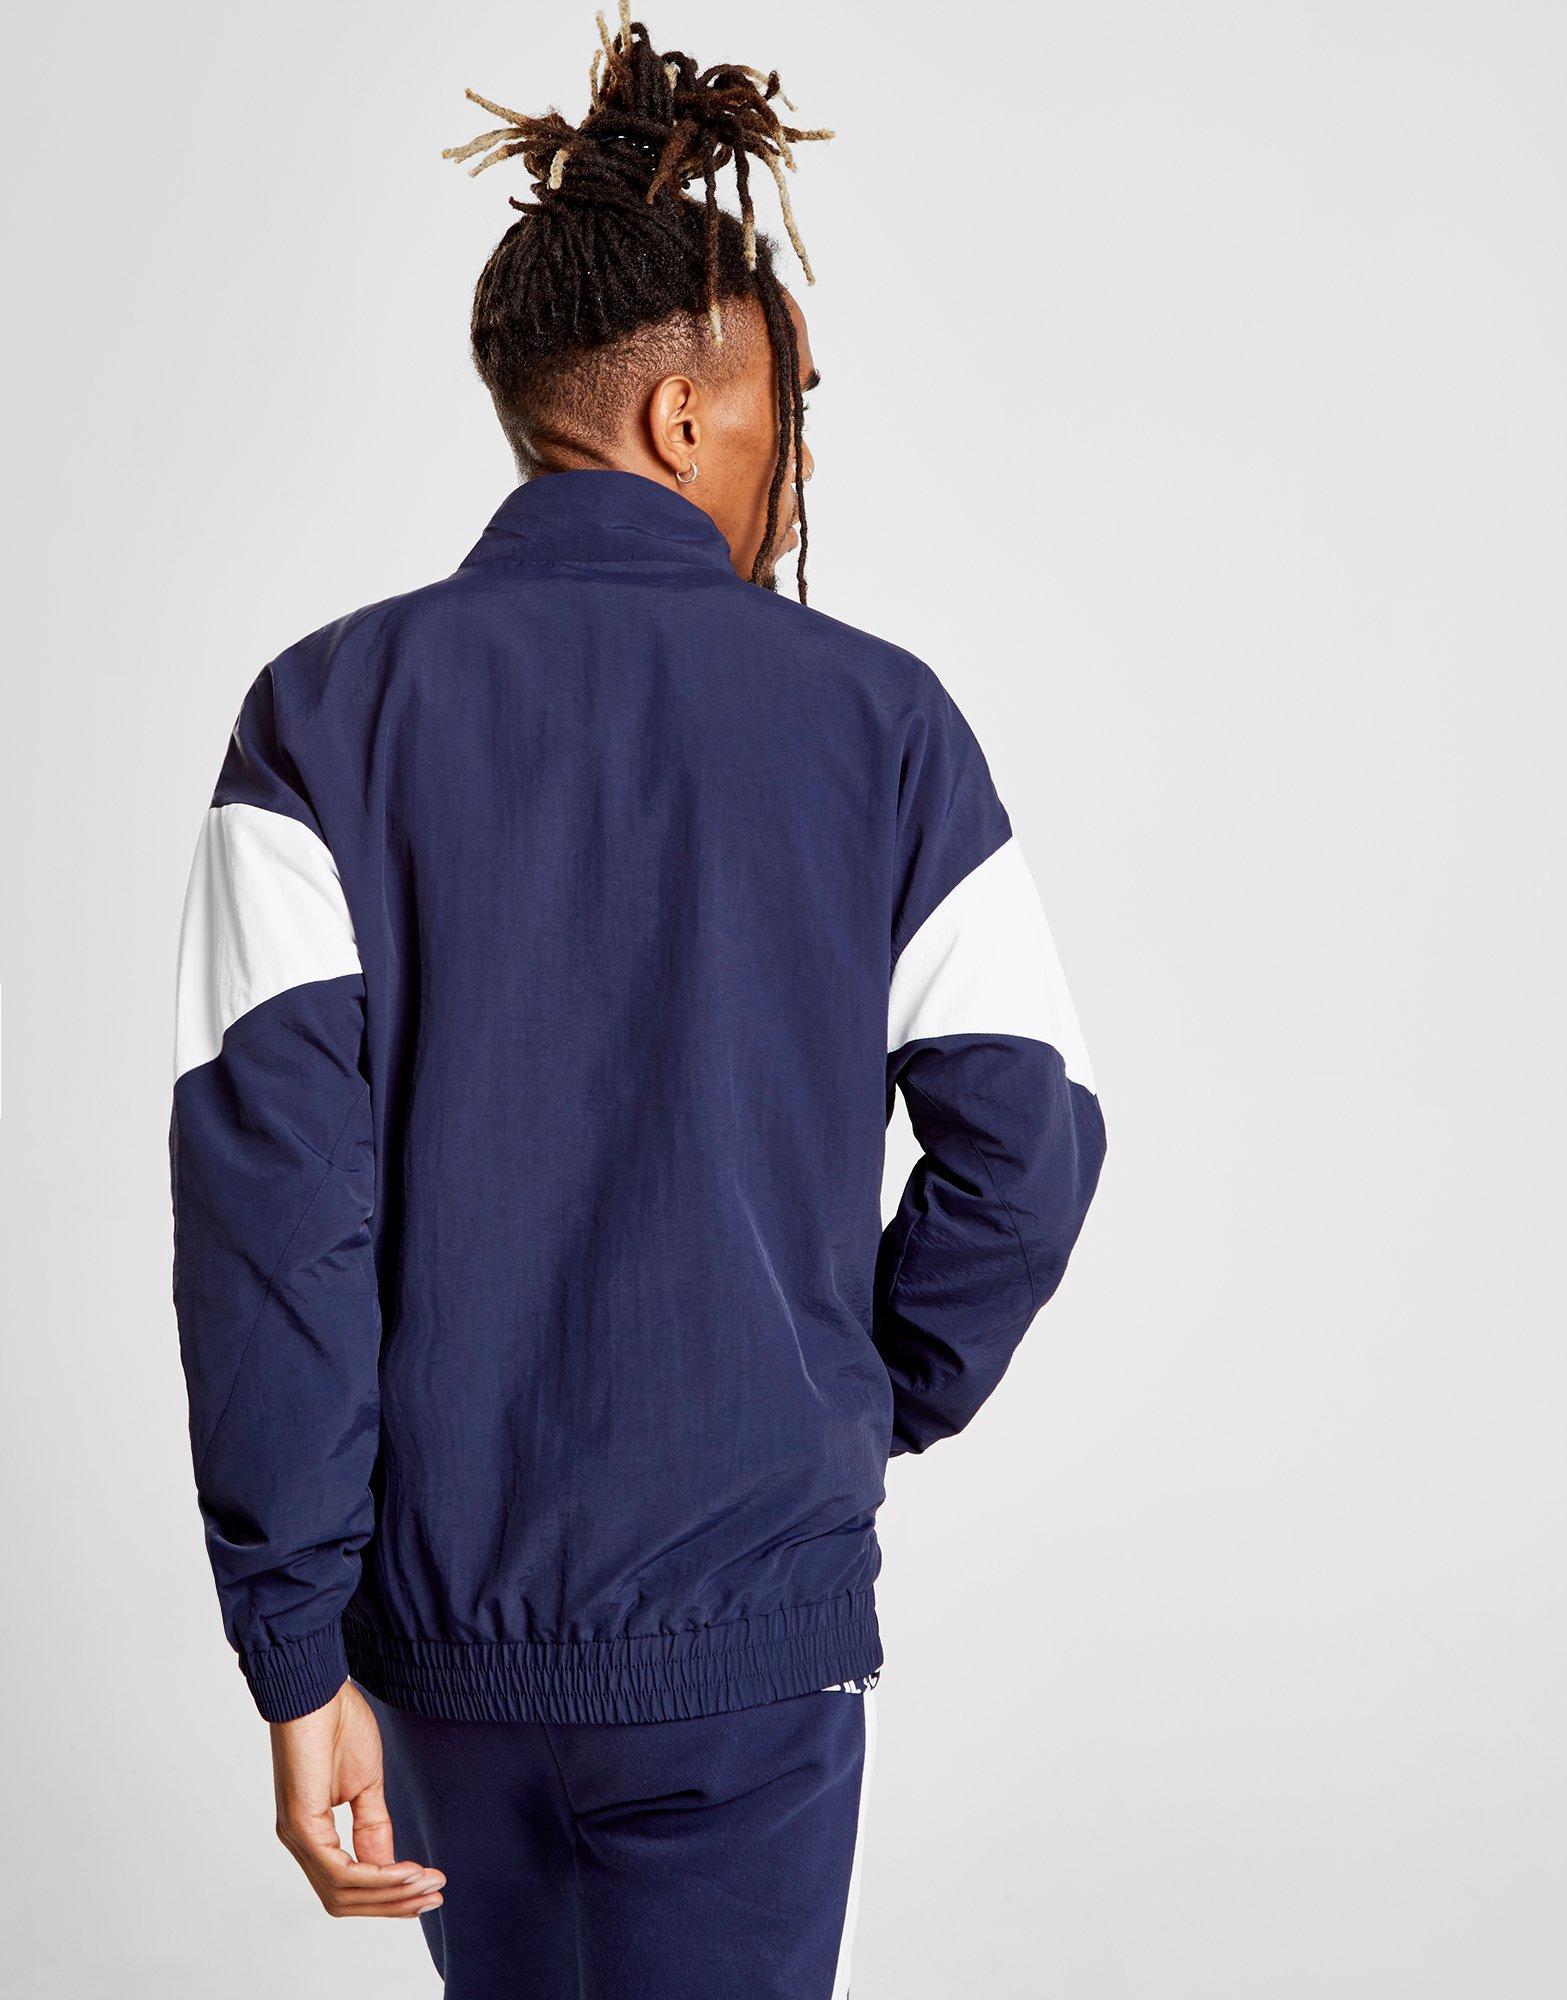 fila griffin woven track top